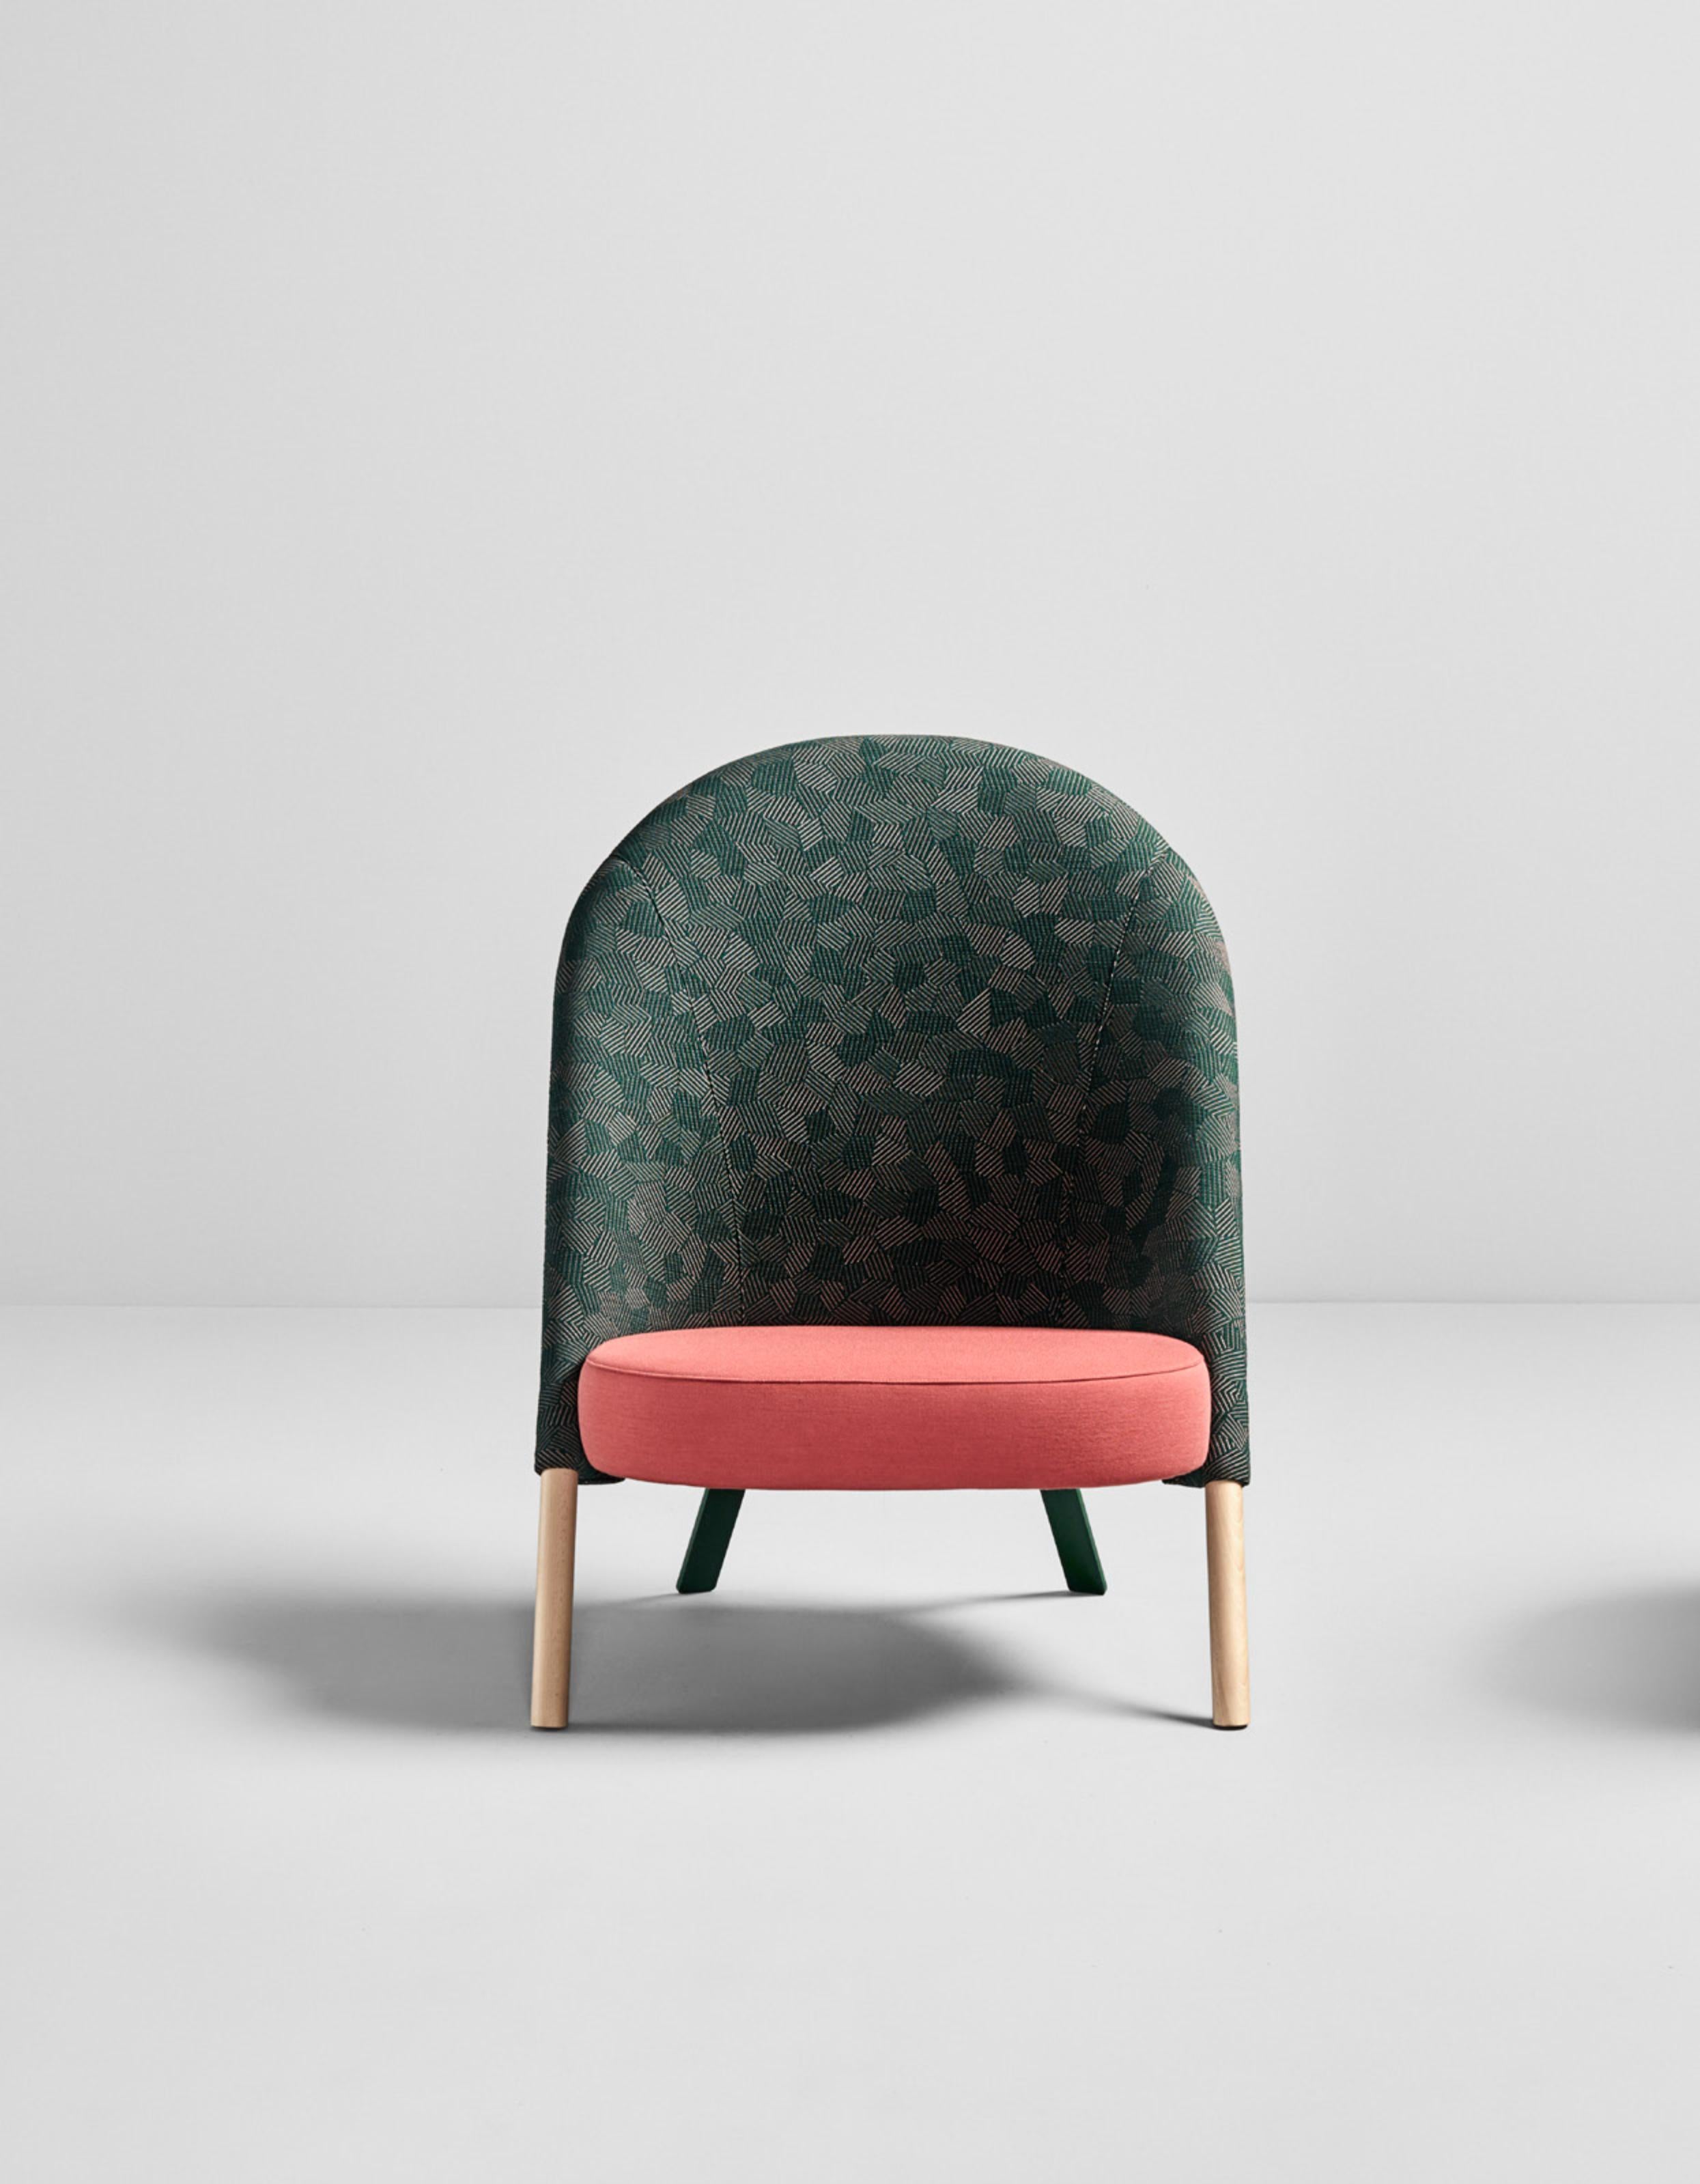 Set of 2 okapi armchair by Pepe Albargues
Dimensions: width 76 -depth 74 - height 102 - seat 40 cm
Materials: Iron structure with plywood and tablex.
Foam CMHR (high resilience and flame retardant) for all our cushion filling systems.
Lacquered